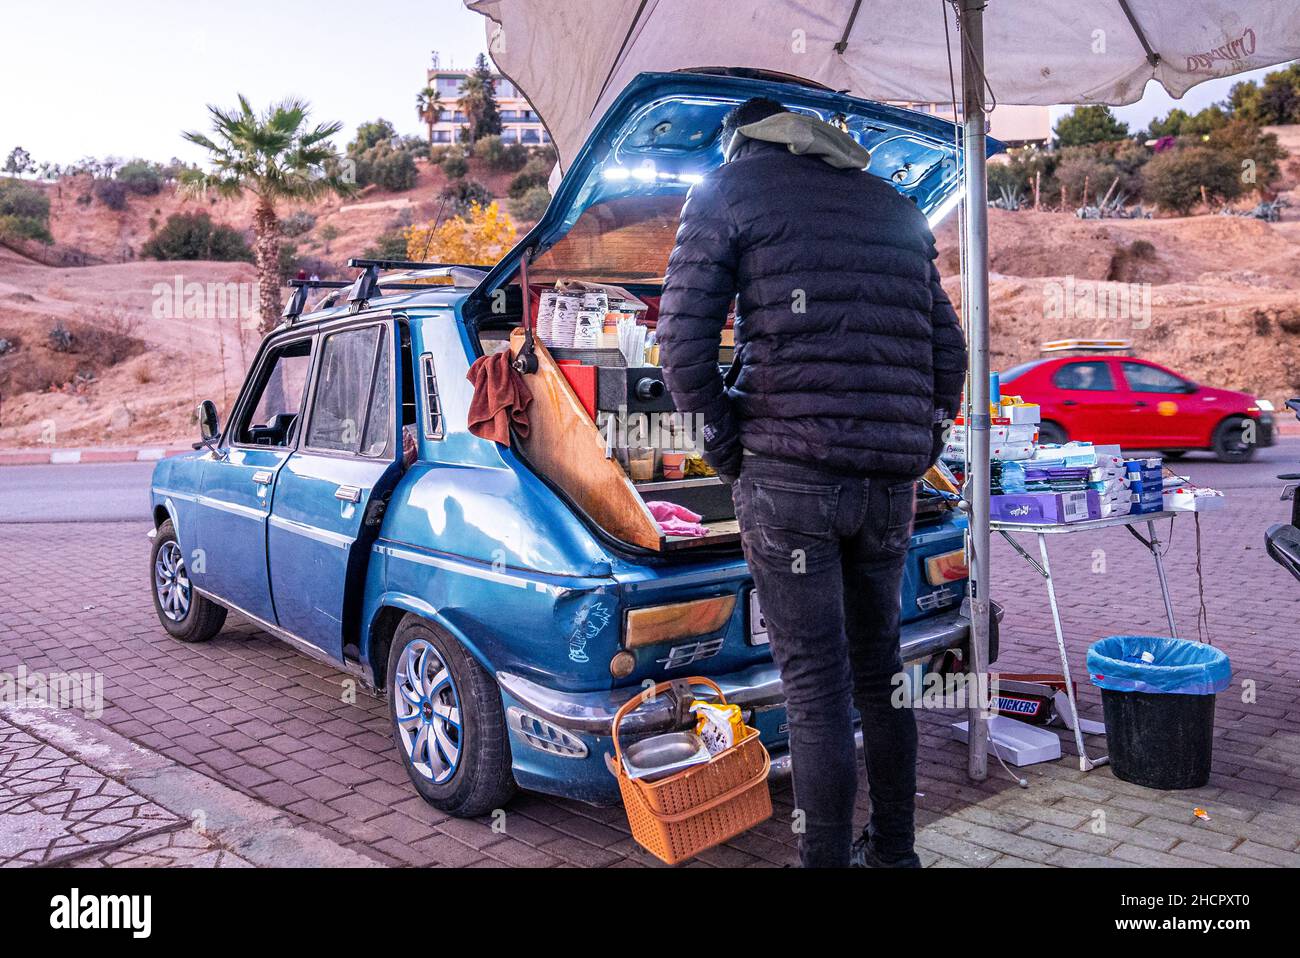 Vendor selling freshly ground coffee made from the trunk of a car Stock Photo